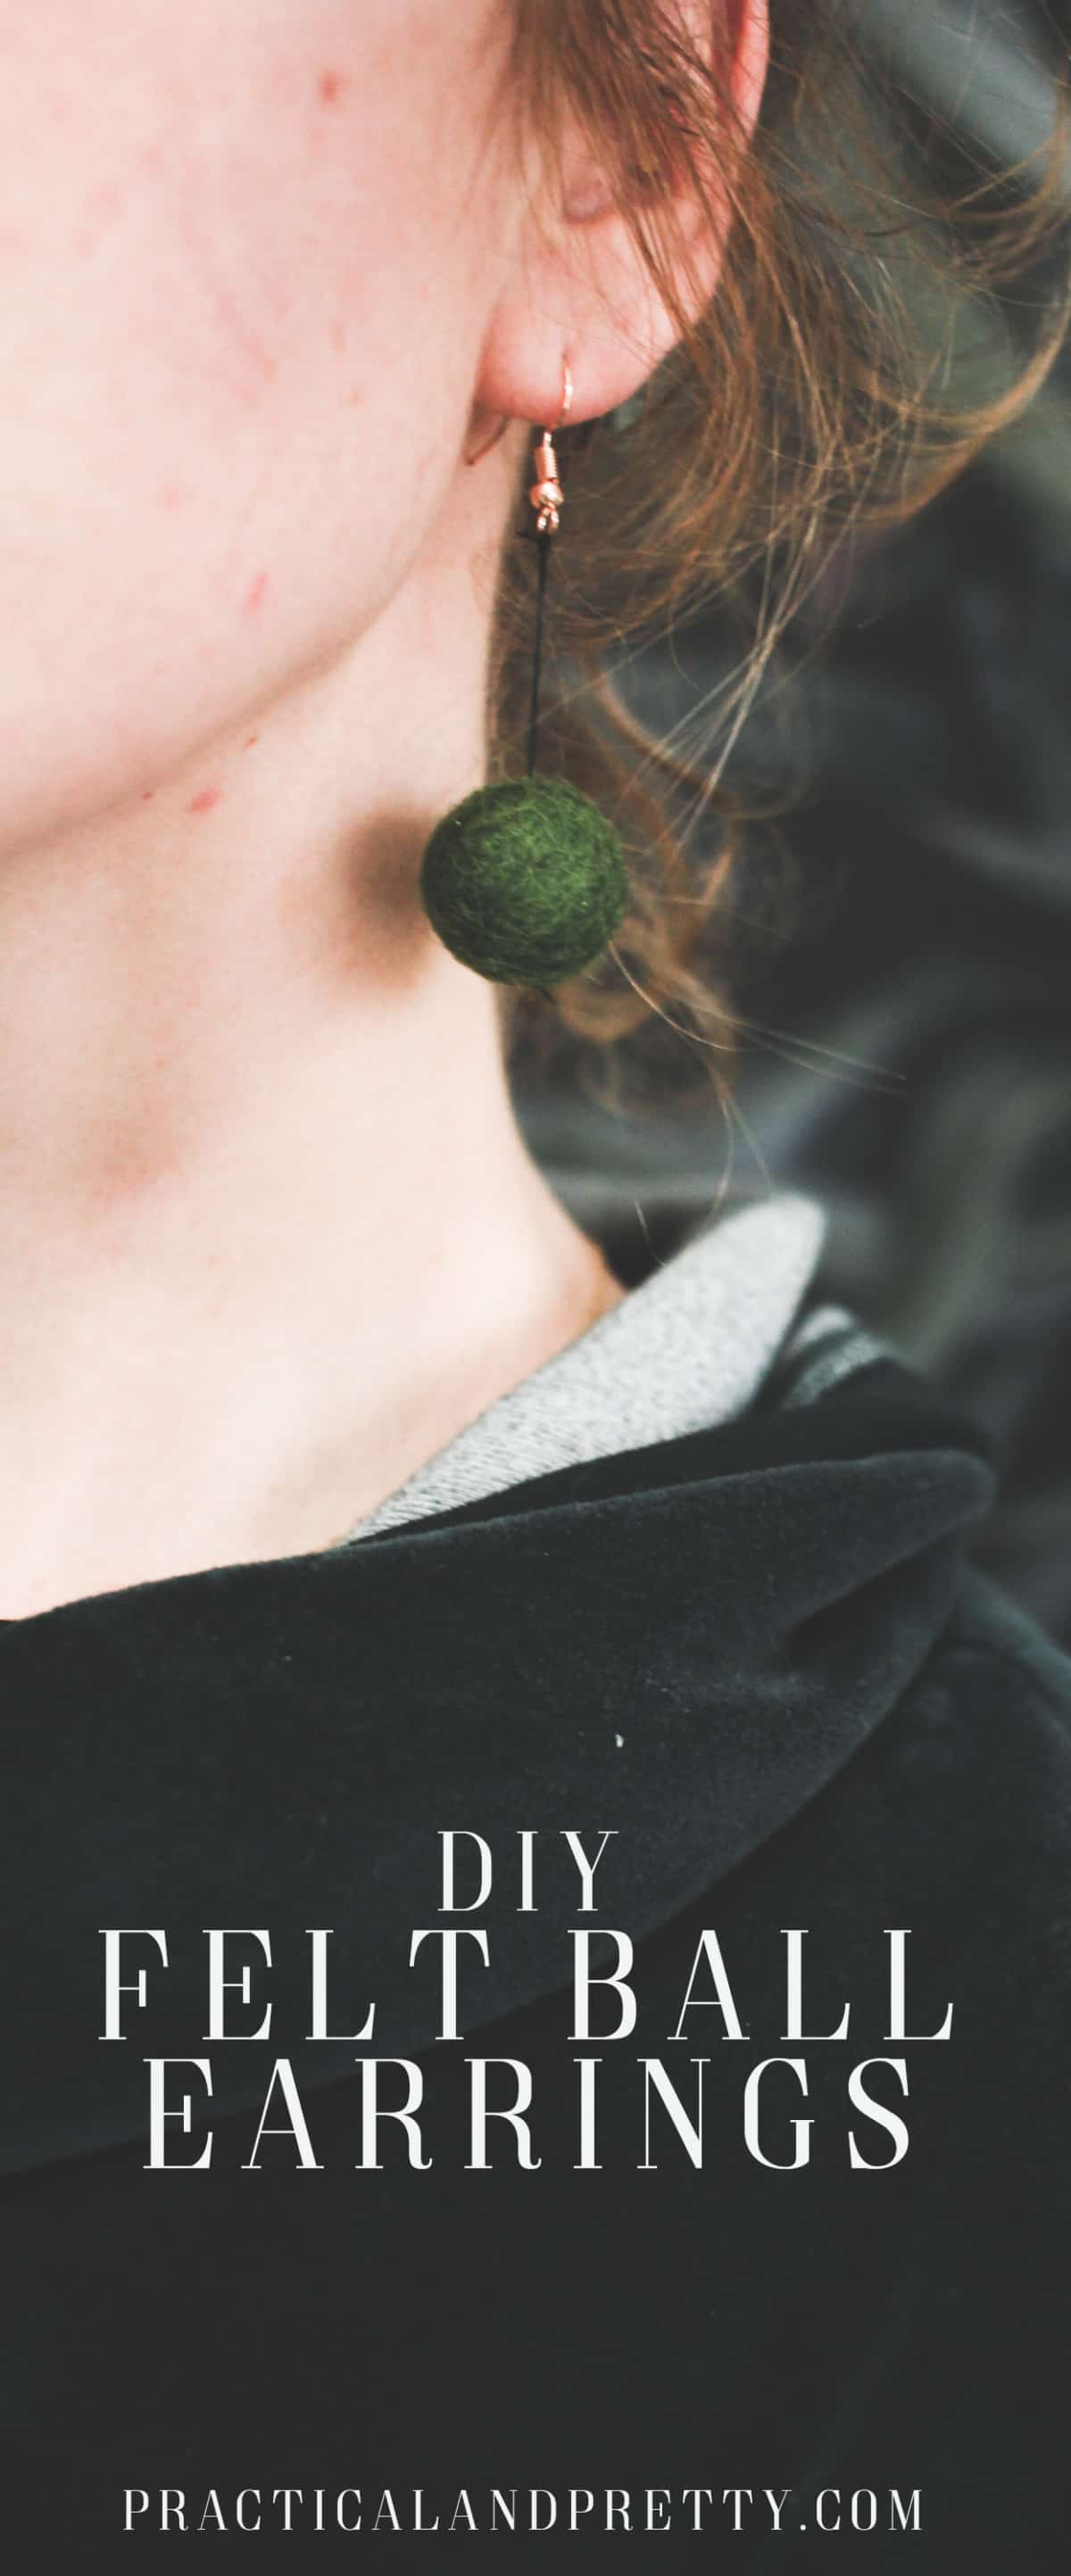 DIY felt ball earrings are so simple and quick. You can make them look exactly how you want, too!